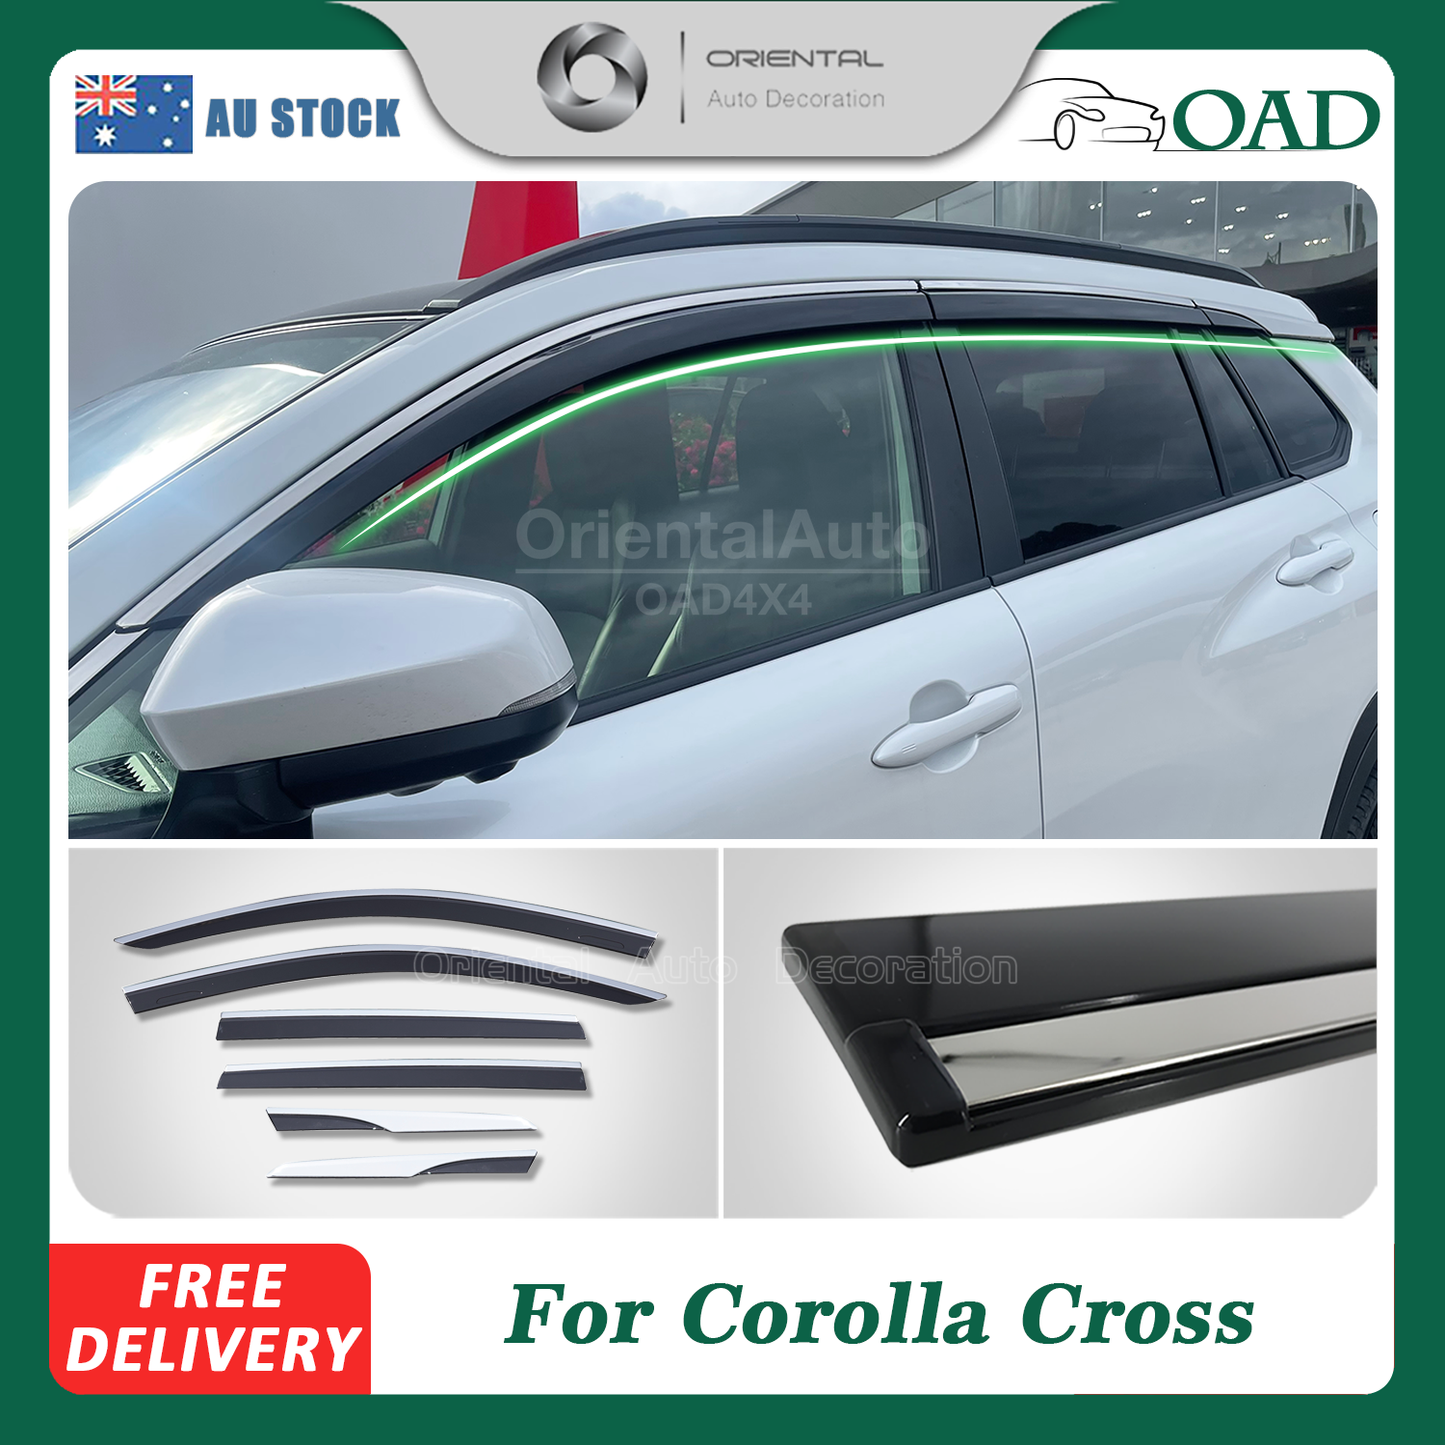 OAD Injection 6pcs Stainless Weathershields For Toyota Corolla Cross SUV 2022+ Weather Shields Weather Shield Window Visor